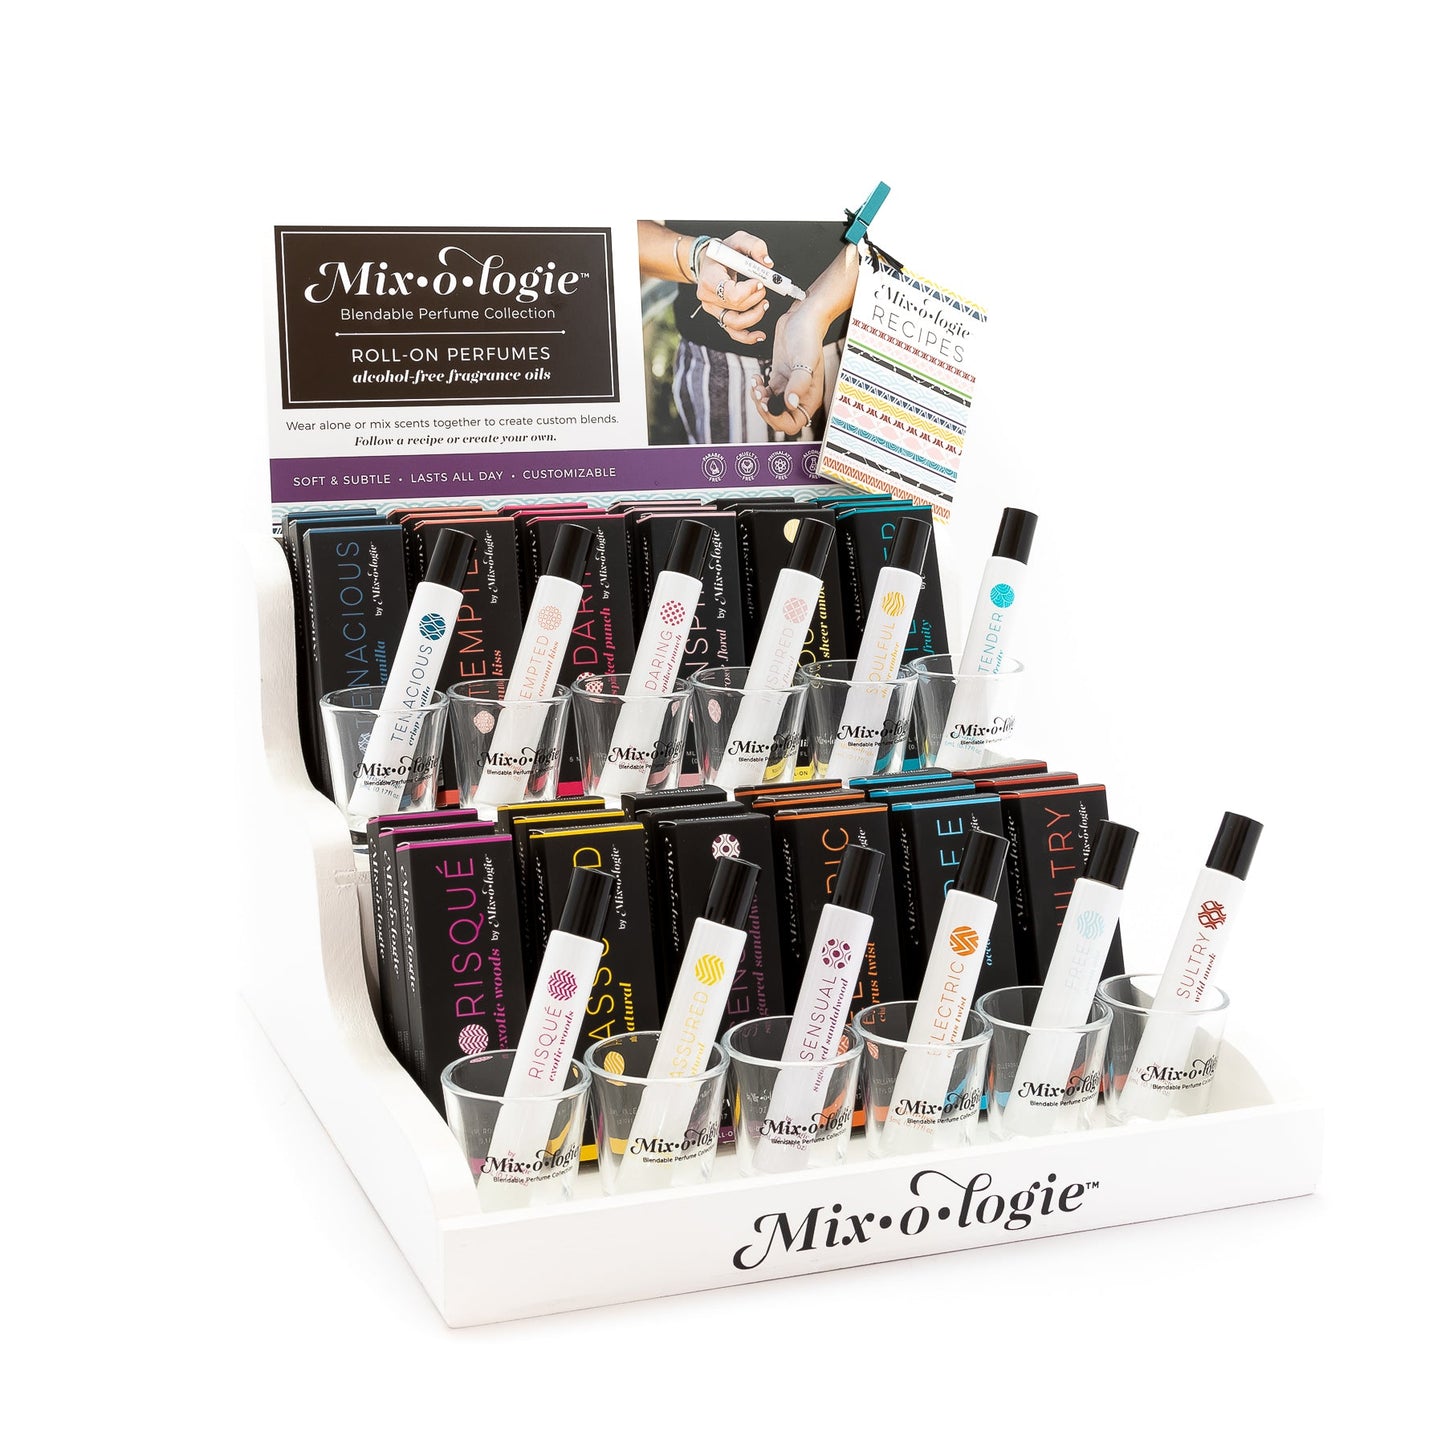 A display of Mixologie Roll On Perfumes.